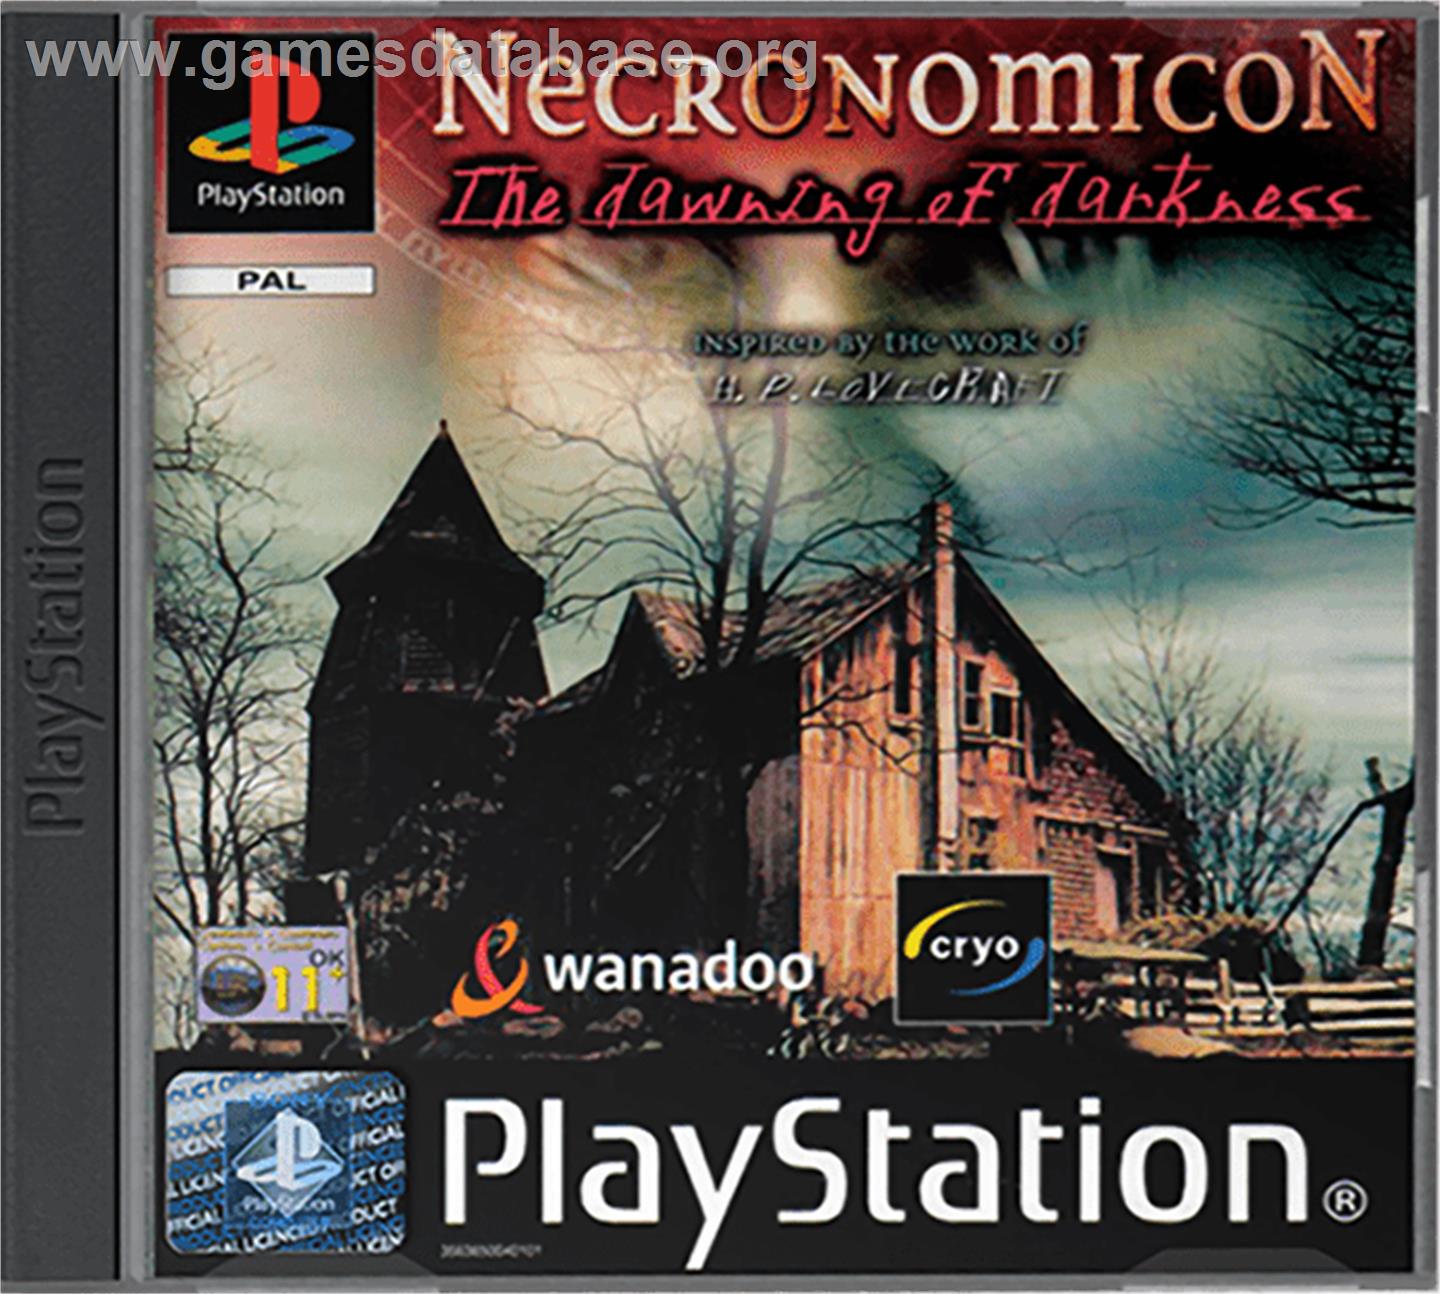 Necronomicon: The Dawning of Darkness - Sony Playstation - Artwork - Box